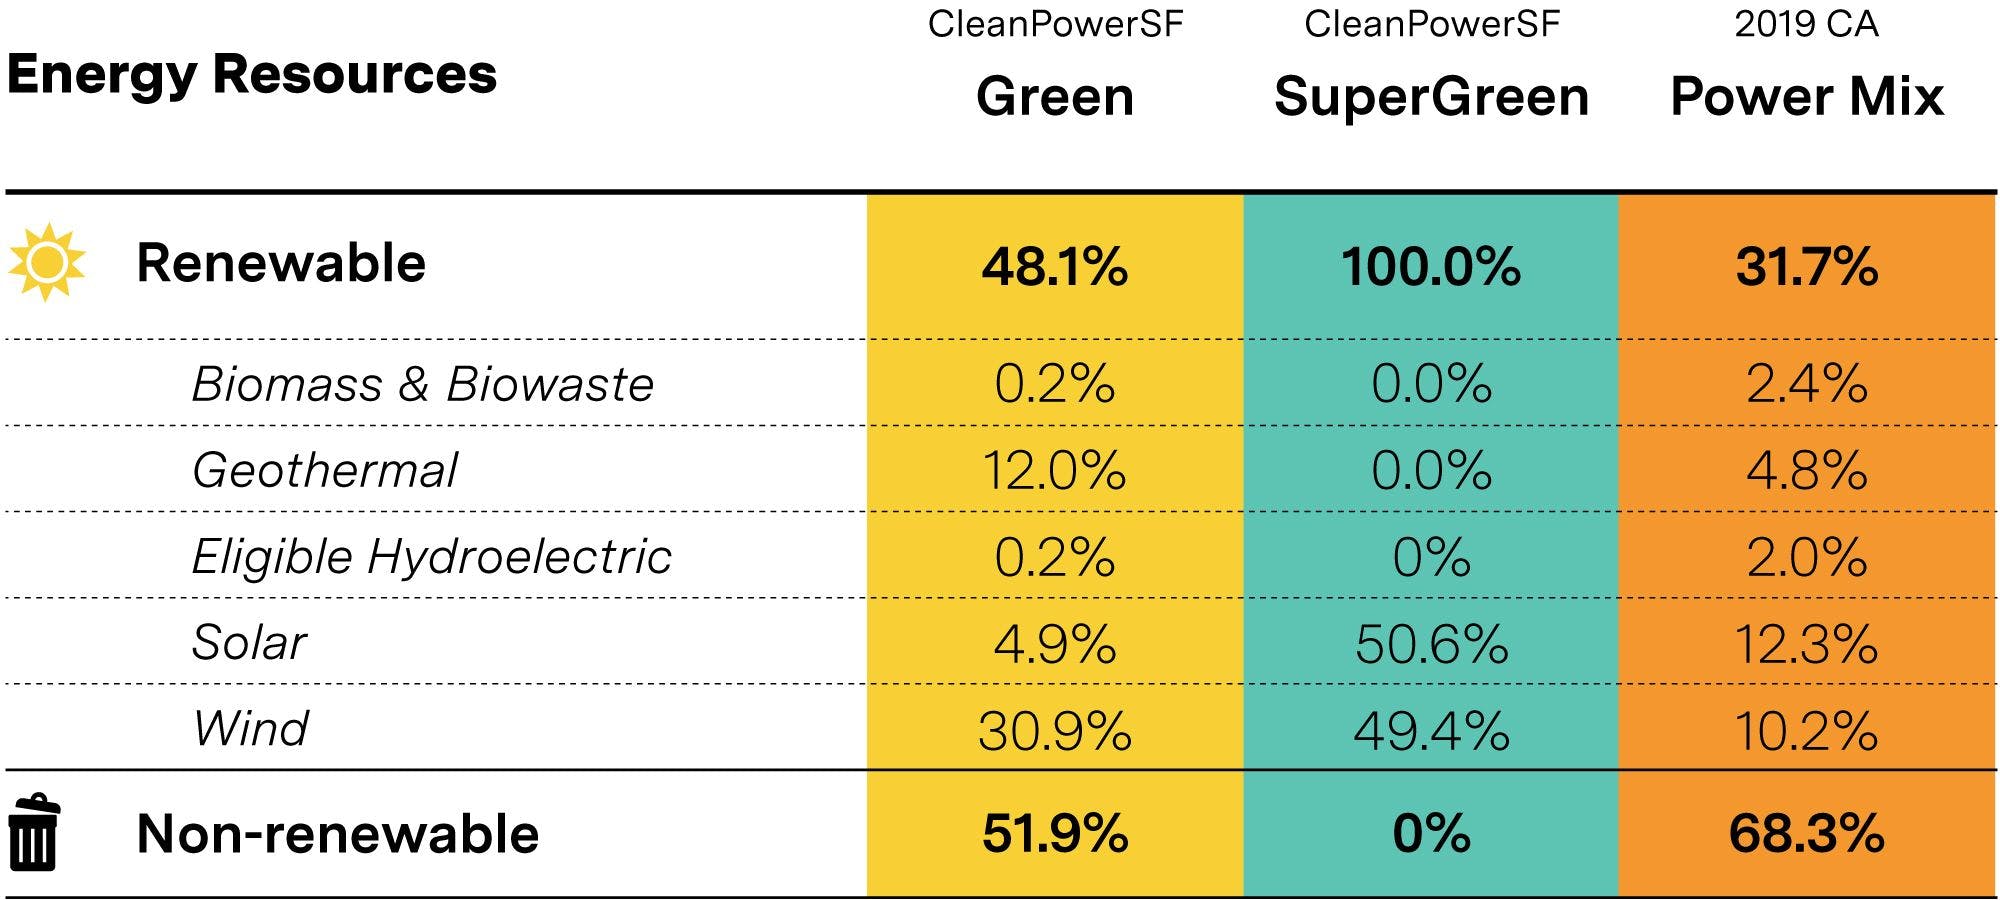 Table of clean power options in San Francisco